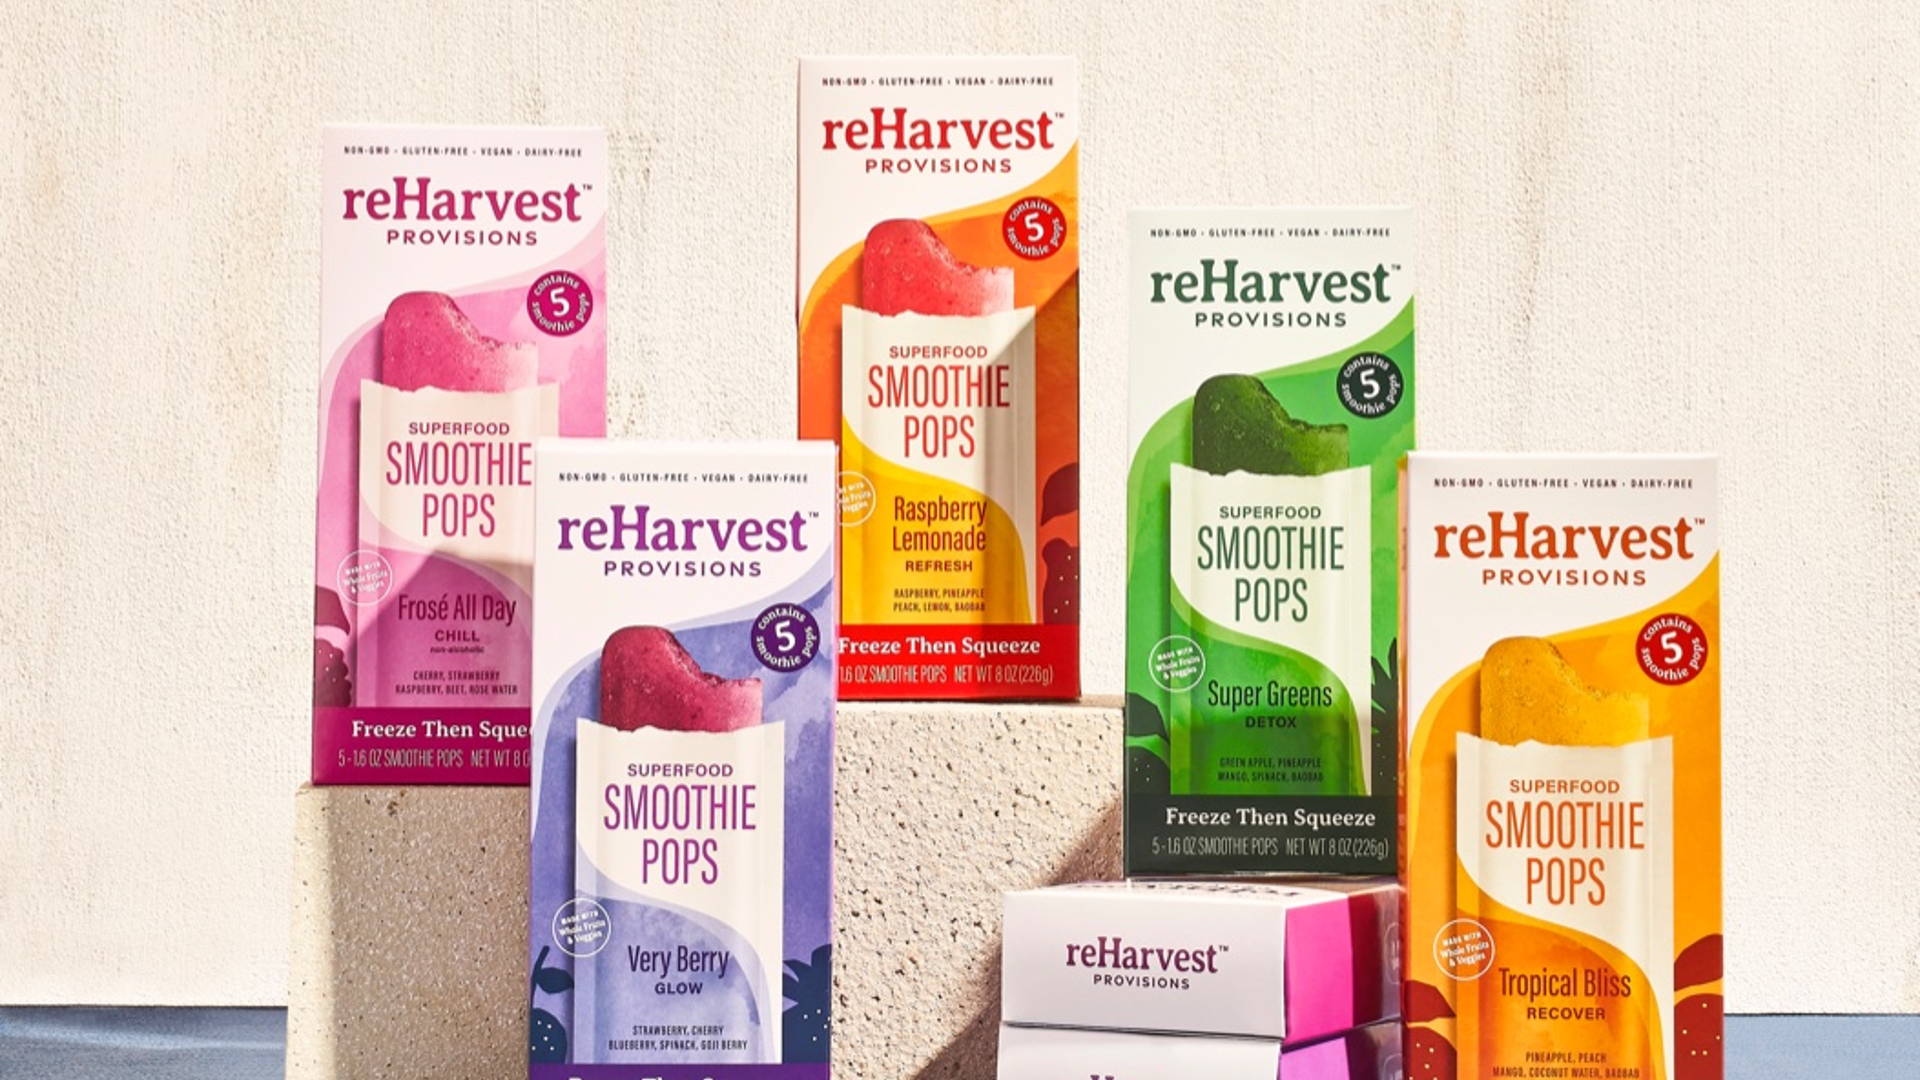 Featured image for reBLEND Superfood Smoothie Pops Are Officially Now ReHarvest Provisions Superfood Smoothie Pops